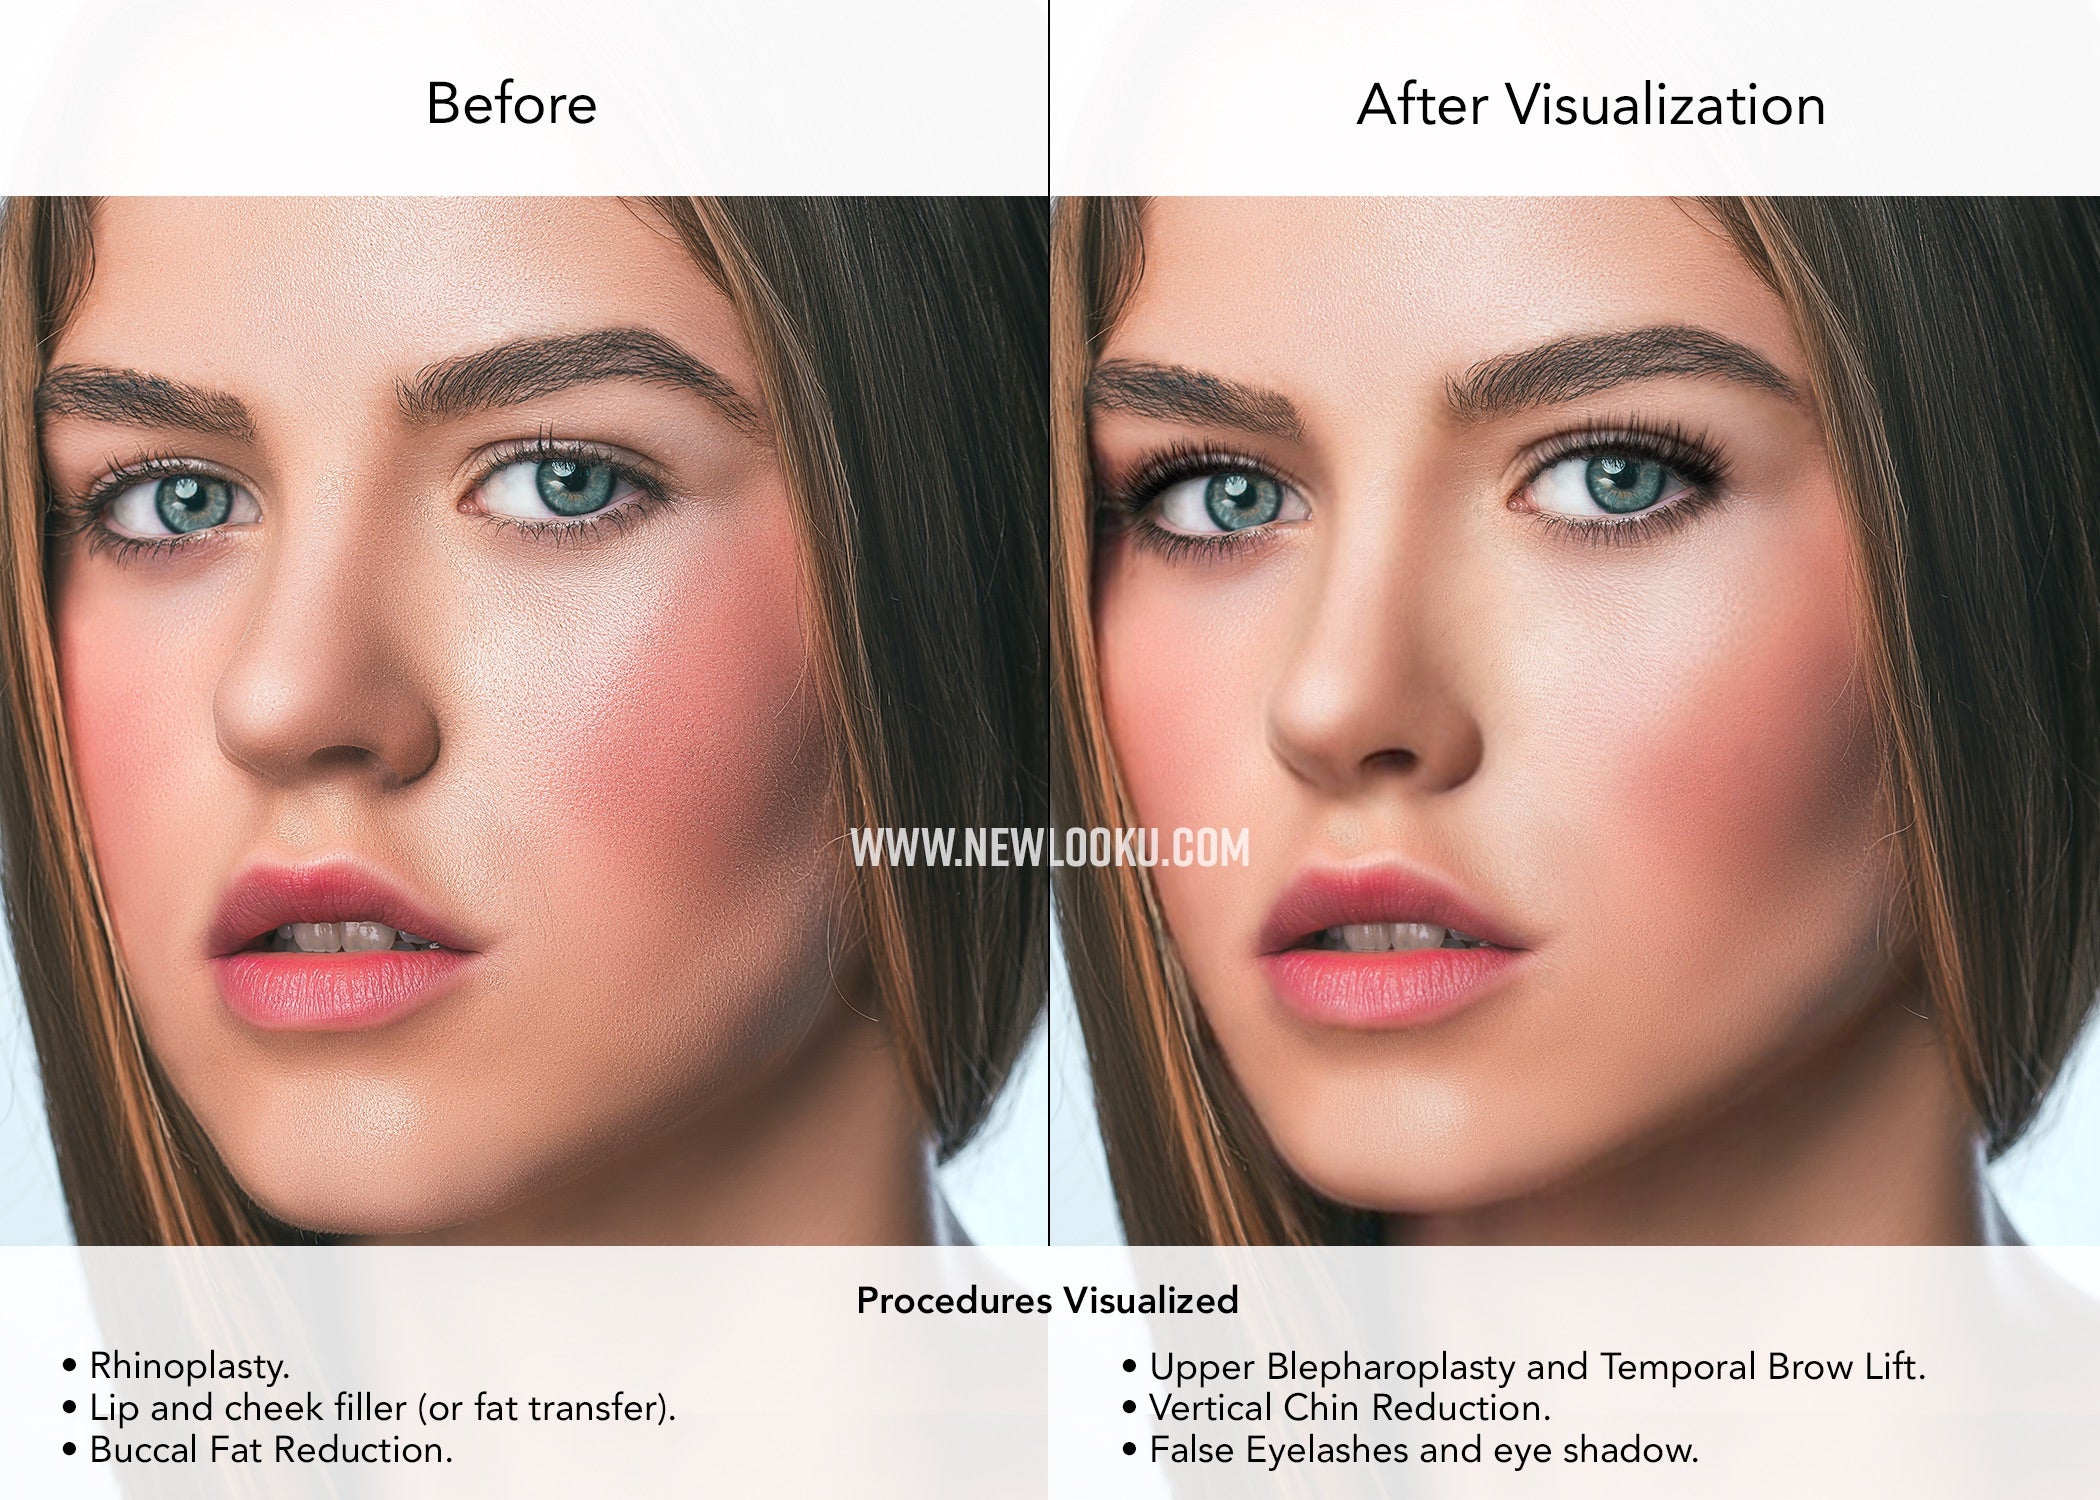 Female Plastic Surgery Visualization Before and After: Rhinoplasty. Lip and cheek filler (or fat transfer). Buccal Fat Reduction. Upper Blepharoplasty and Temporal Brow Lift. Vertical Chin Reduction.